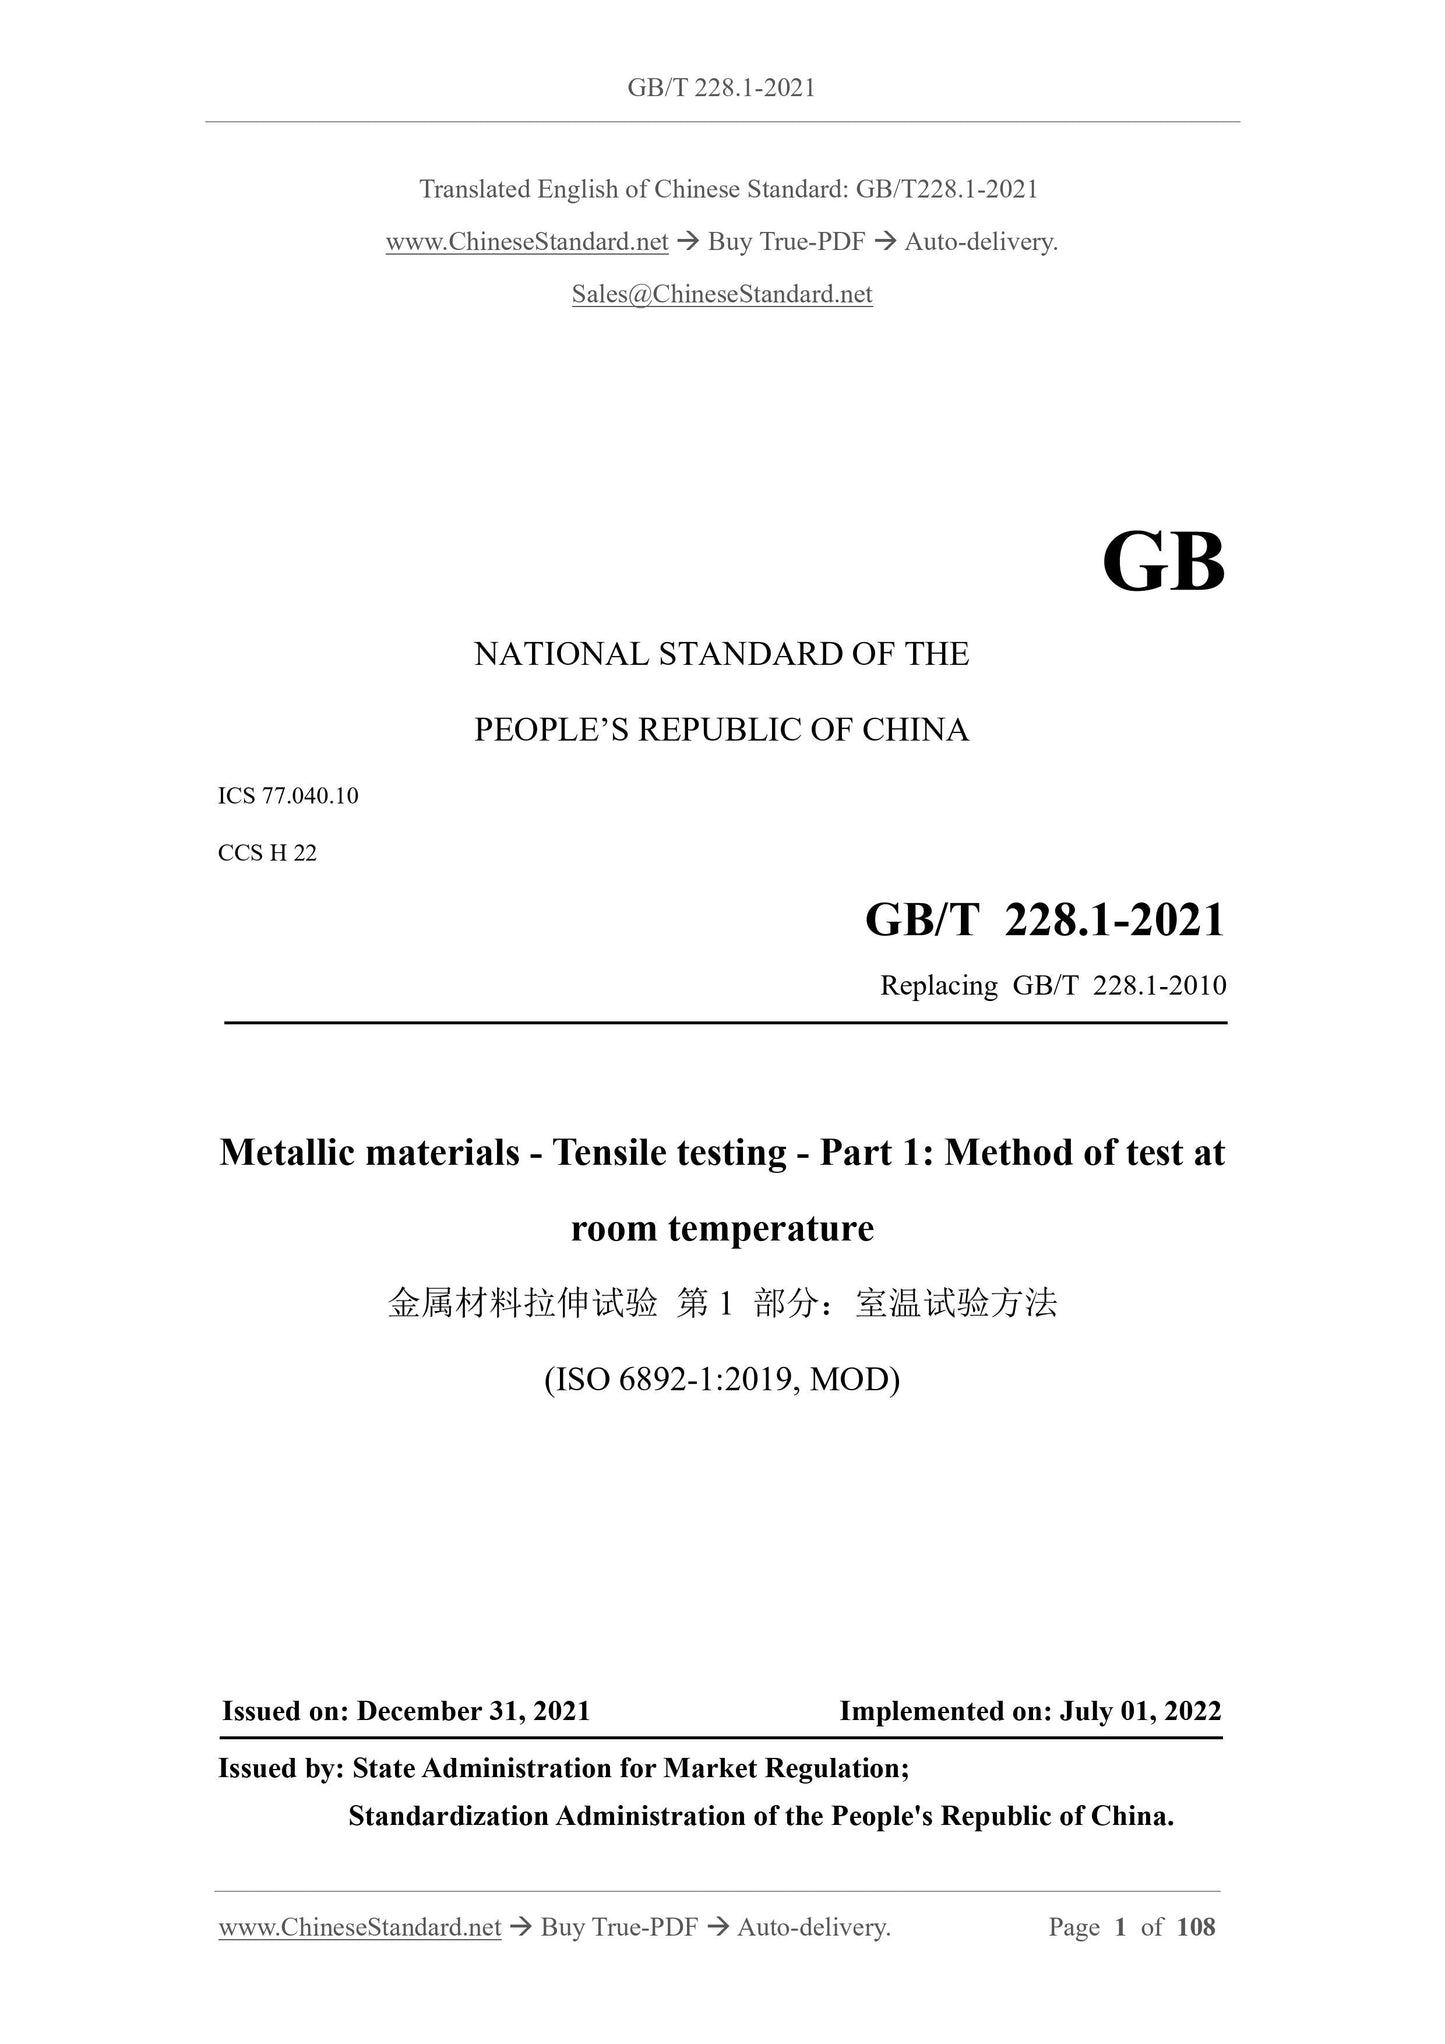 GB/T 228.1-2021 Page 1